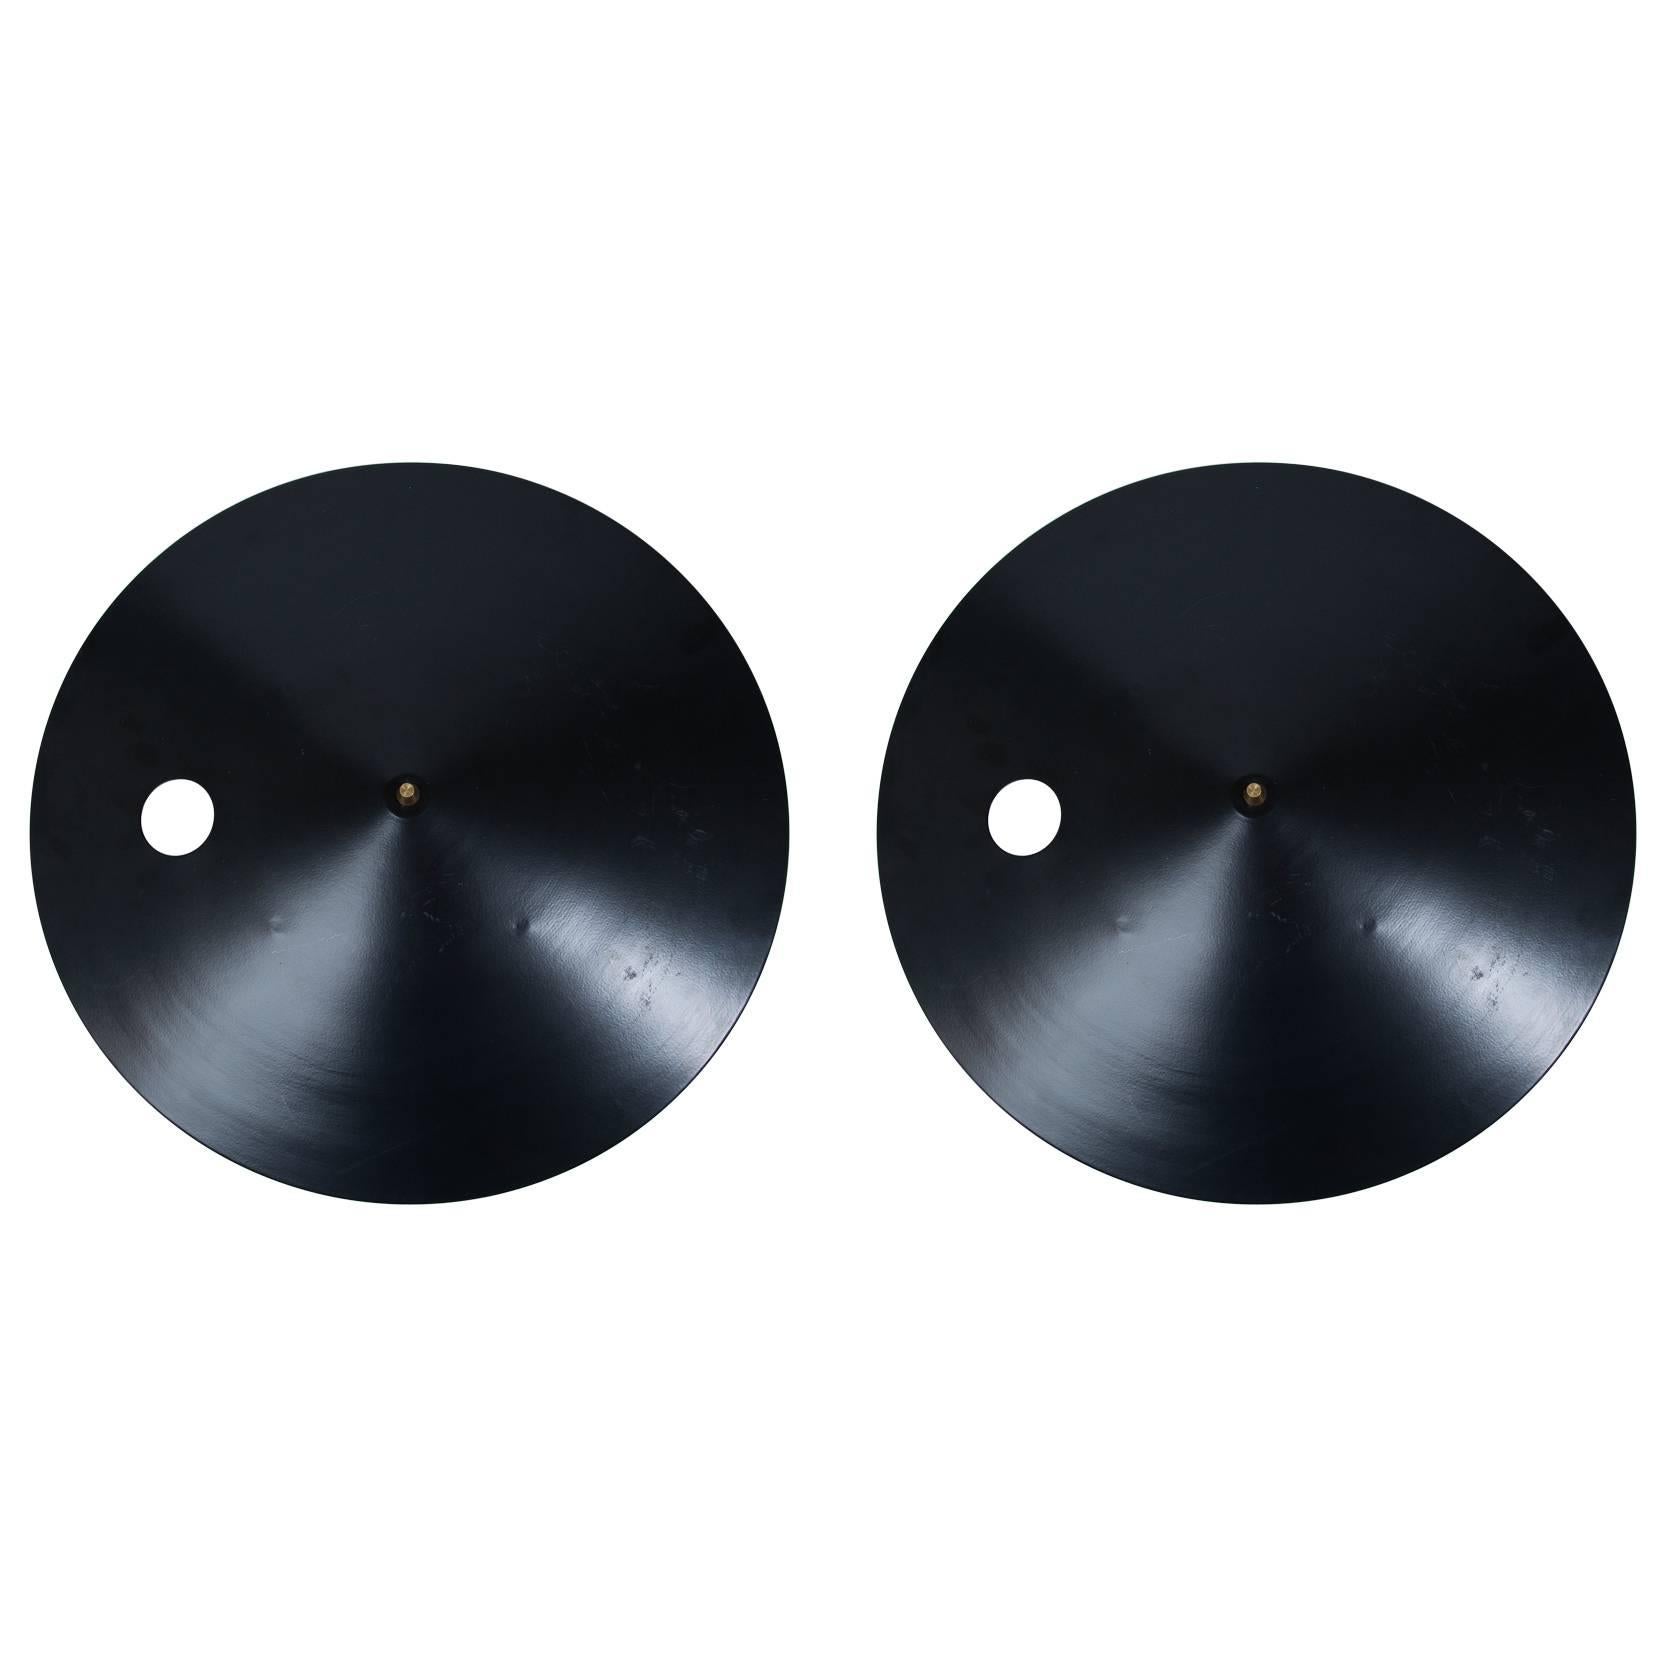 Pair of circular black enameled steel wall sconces with brass finials. Illumination exquisitely comes from the sides and a small cut-out circle on the shade. White enameled interiors.